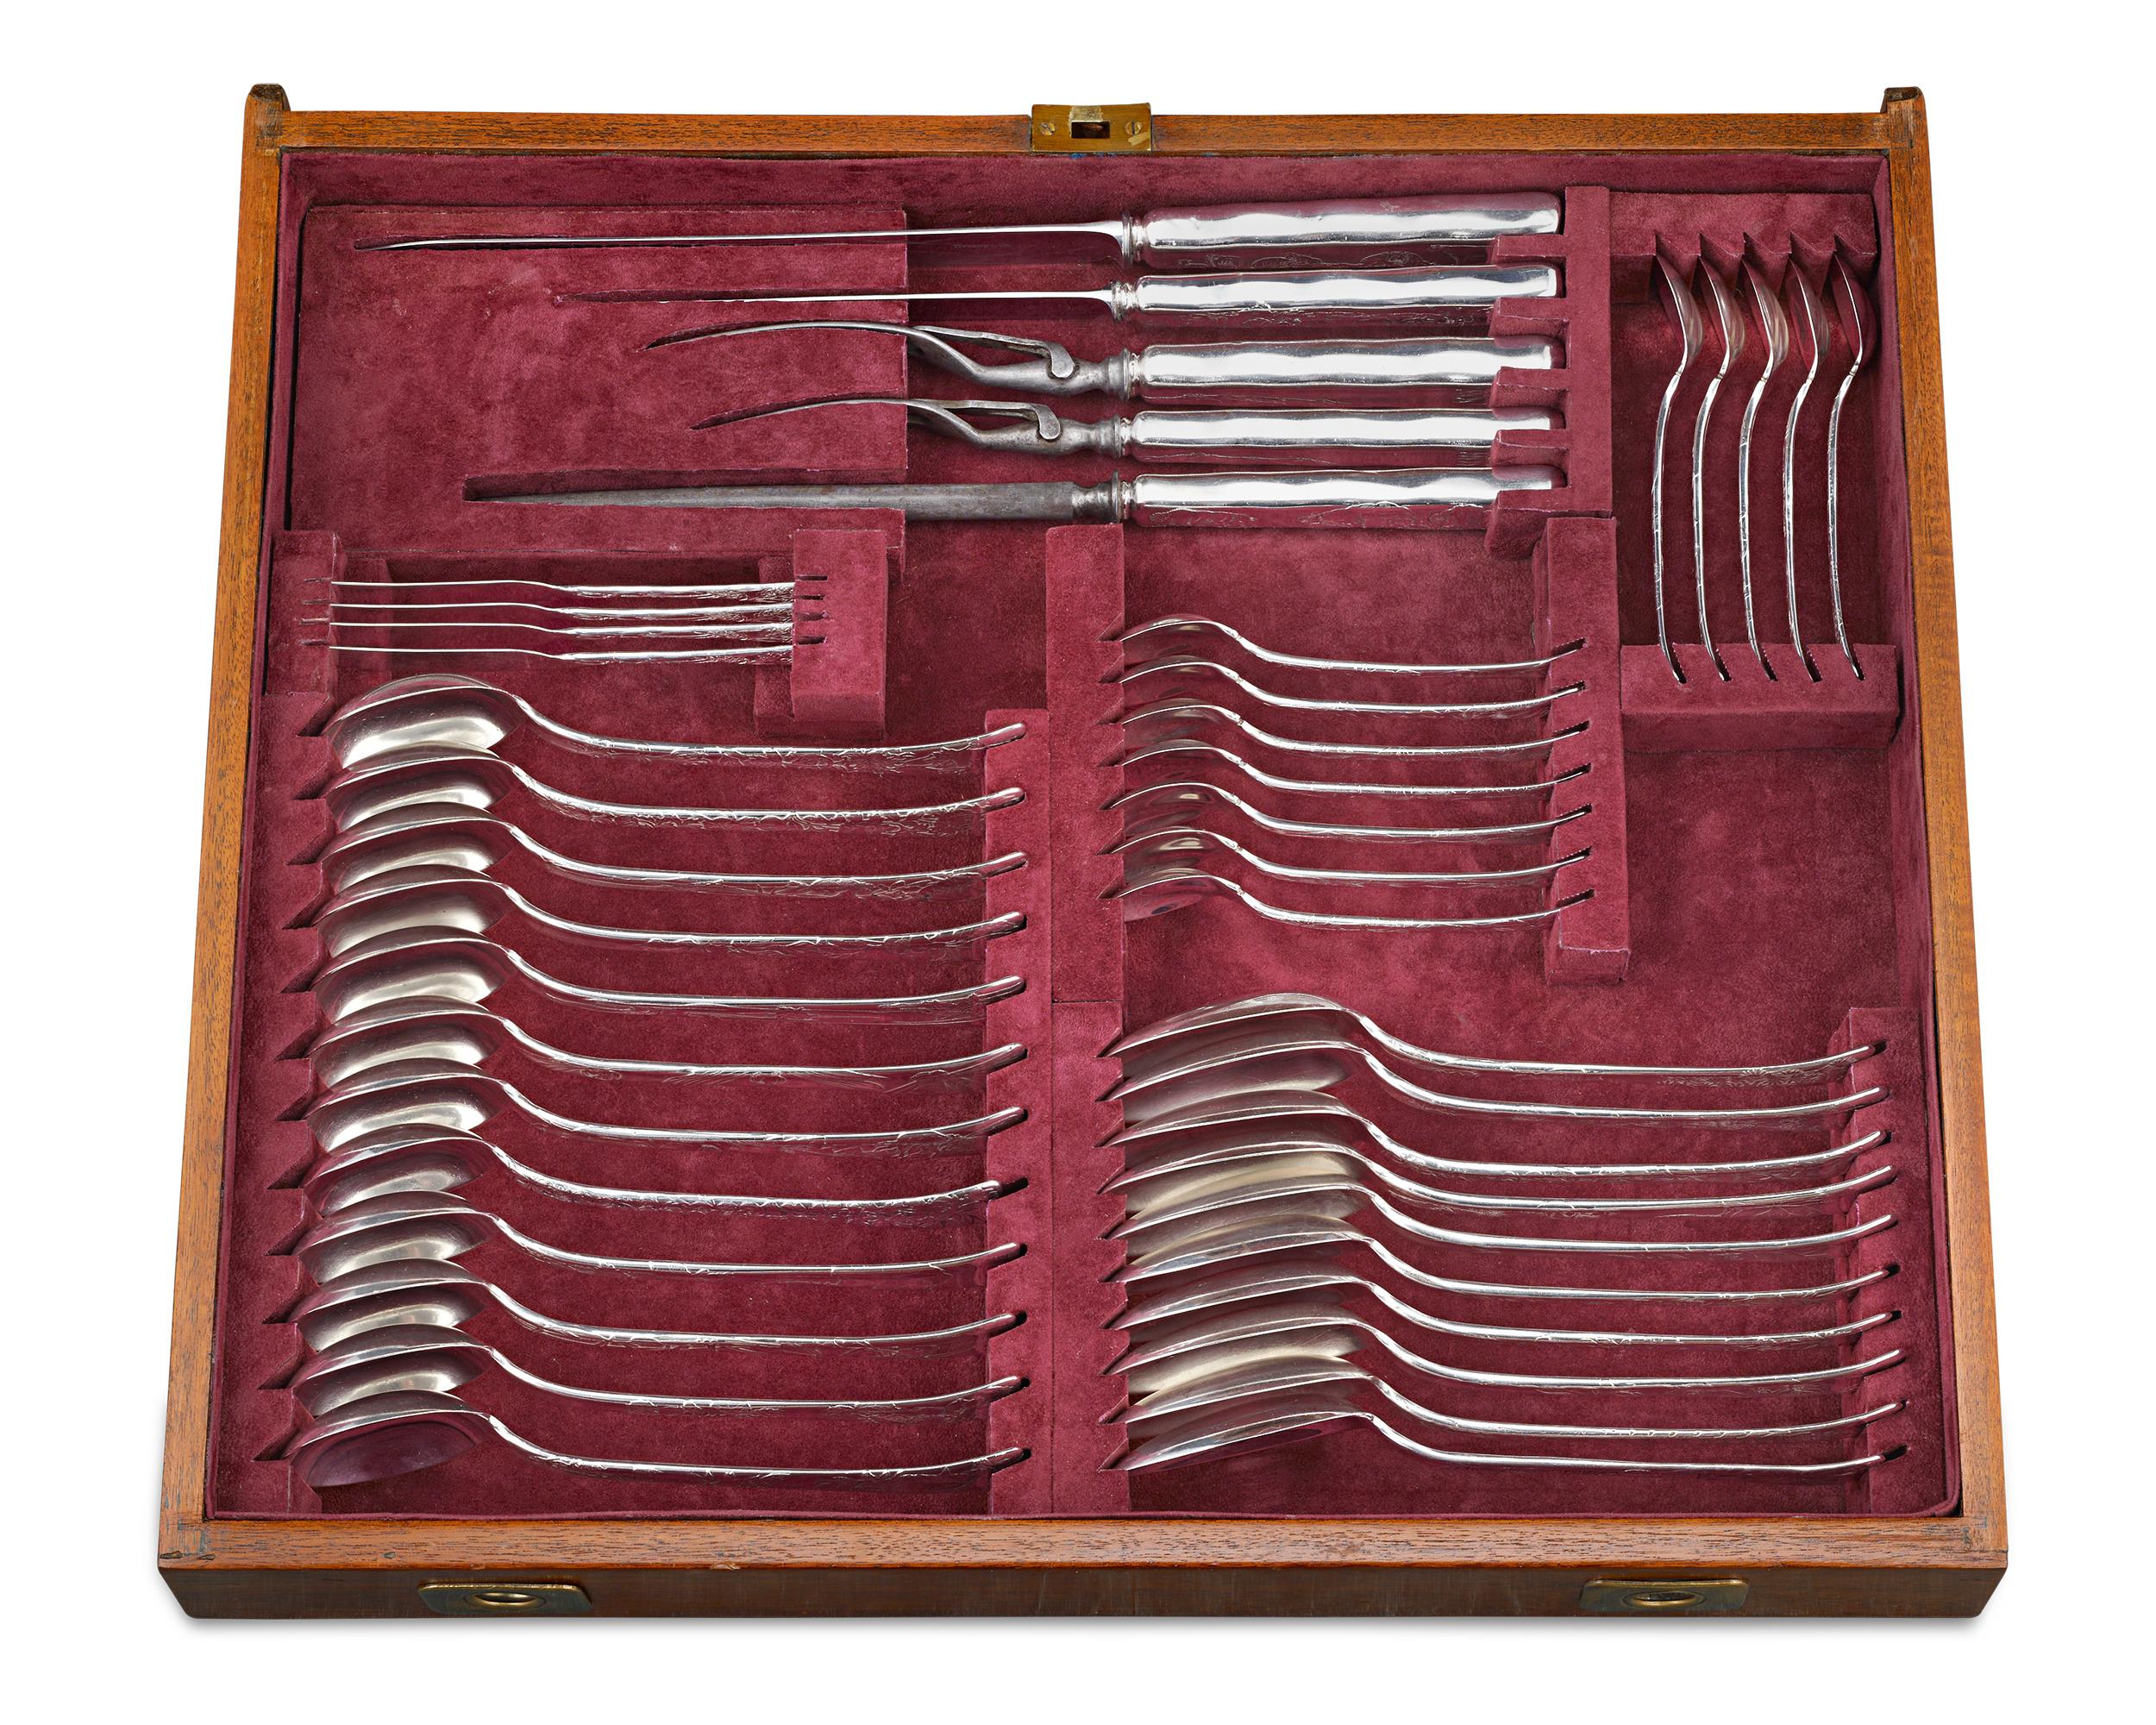 Tiffany & Co. Lap-Over Edge Flatware Service, 248 Pieces In Excellent Condition For Sale In New Orleans, LA